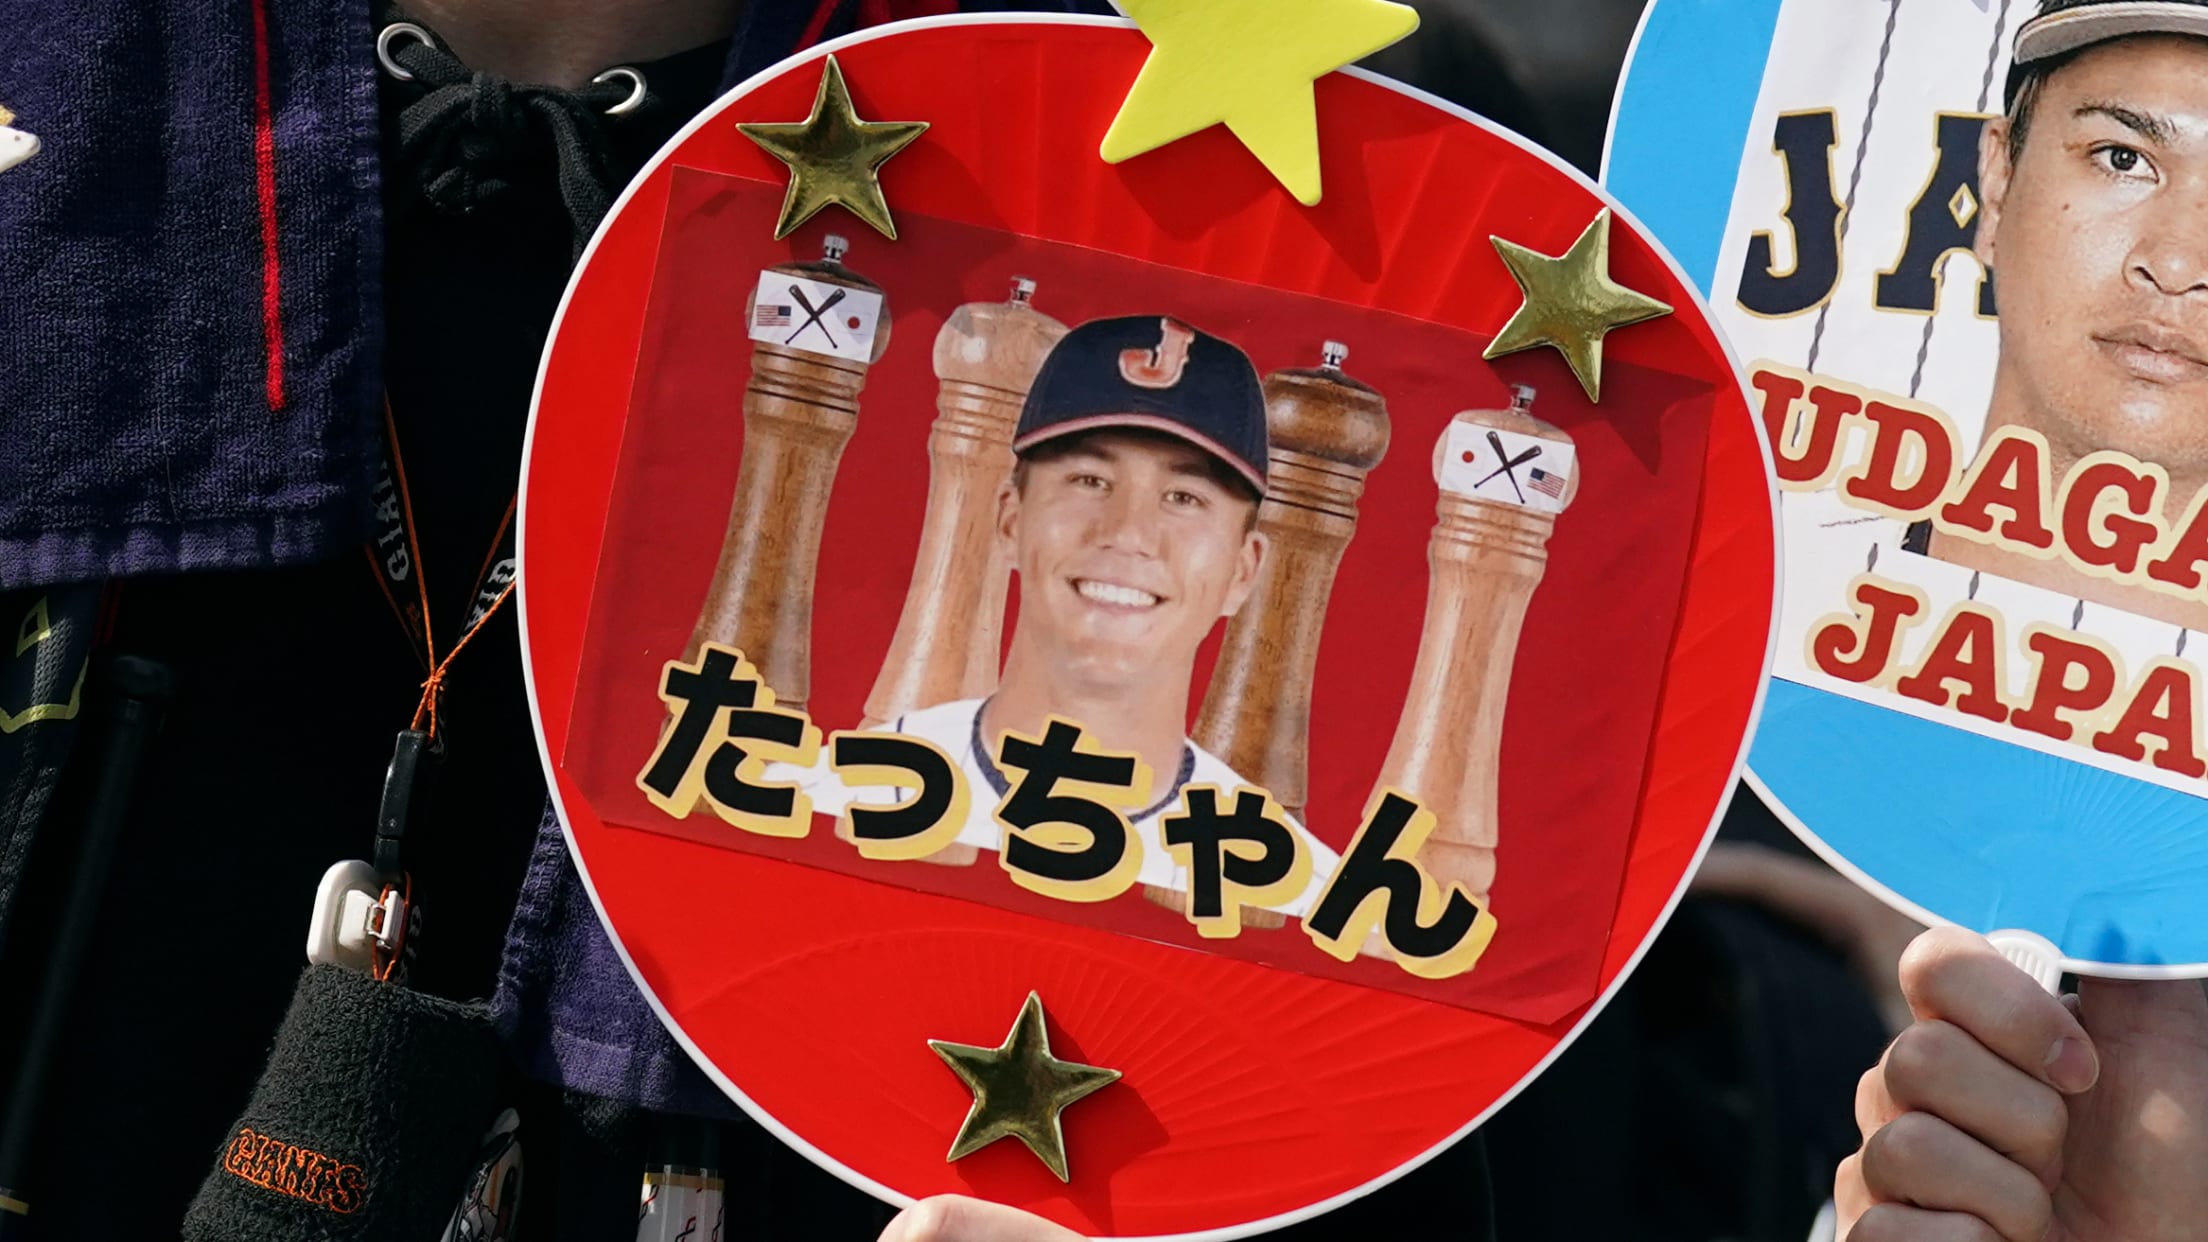 A red paddle fan showing a smiling player with a J on his cap and Japanese lettering underneath